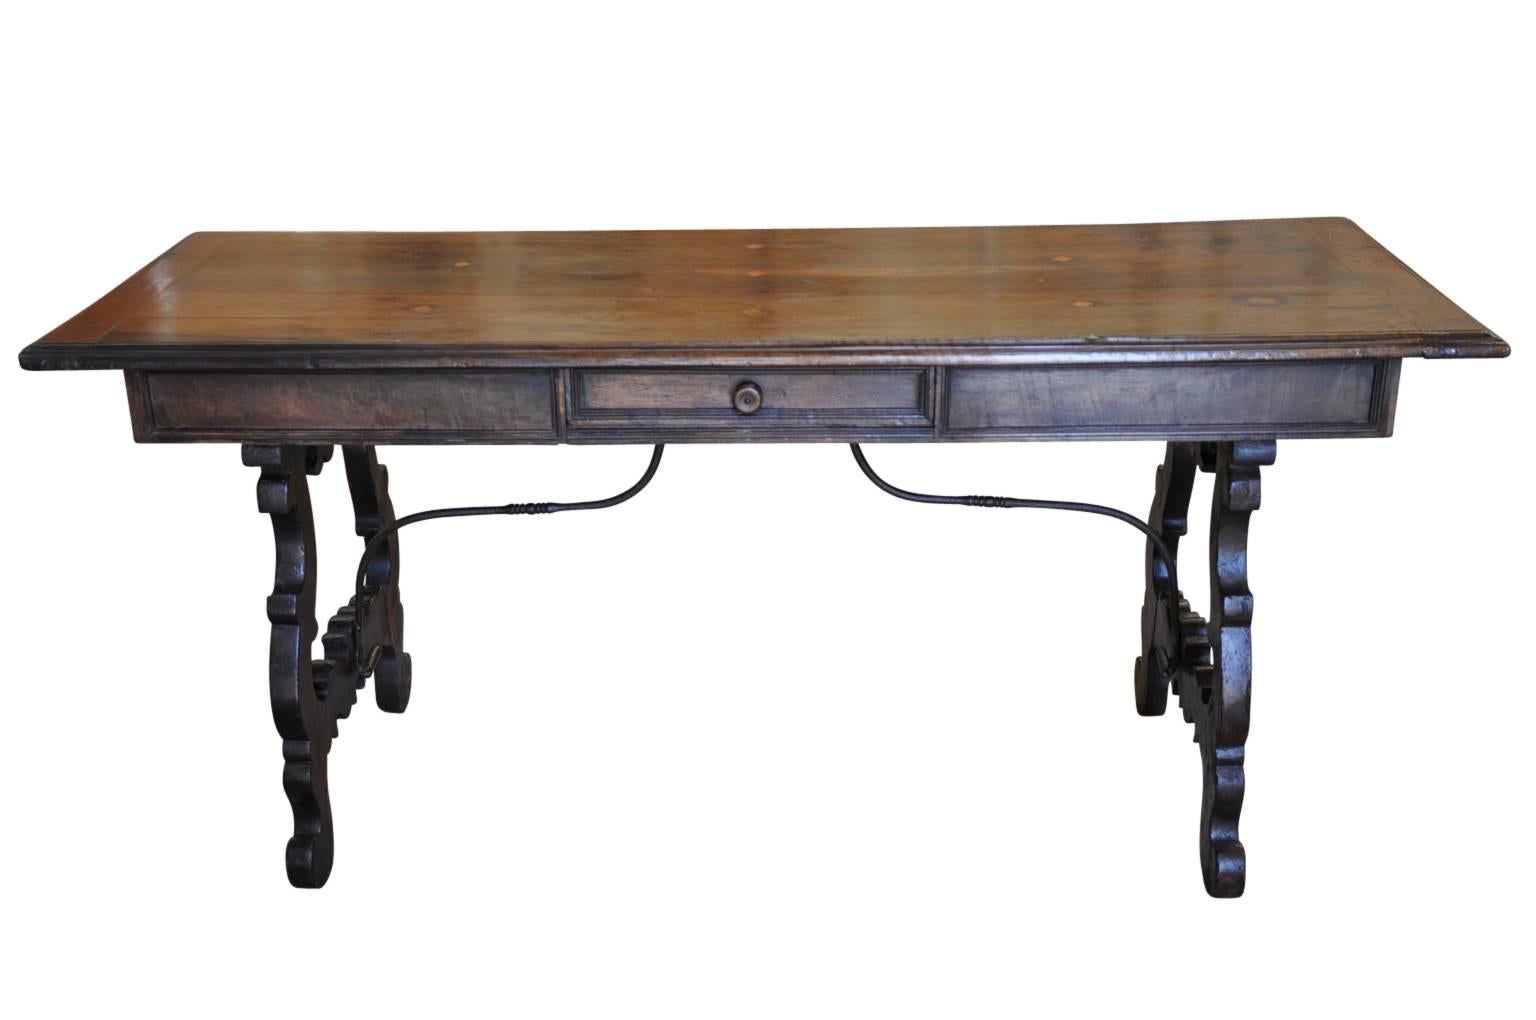 A very stately early 19th century desk from Northern Italy. Handsomely constructed from walnut with one drawer, classical lyre shaped legs and hand forged iron stretchers. A very beautiful desk that will serve nicely as a sofa table as well. Great